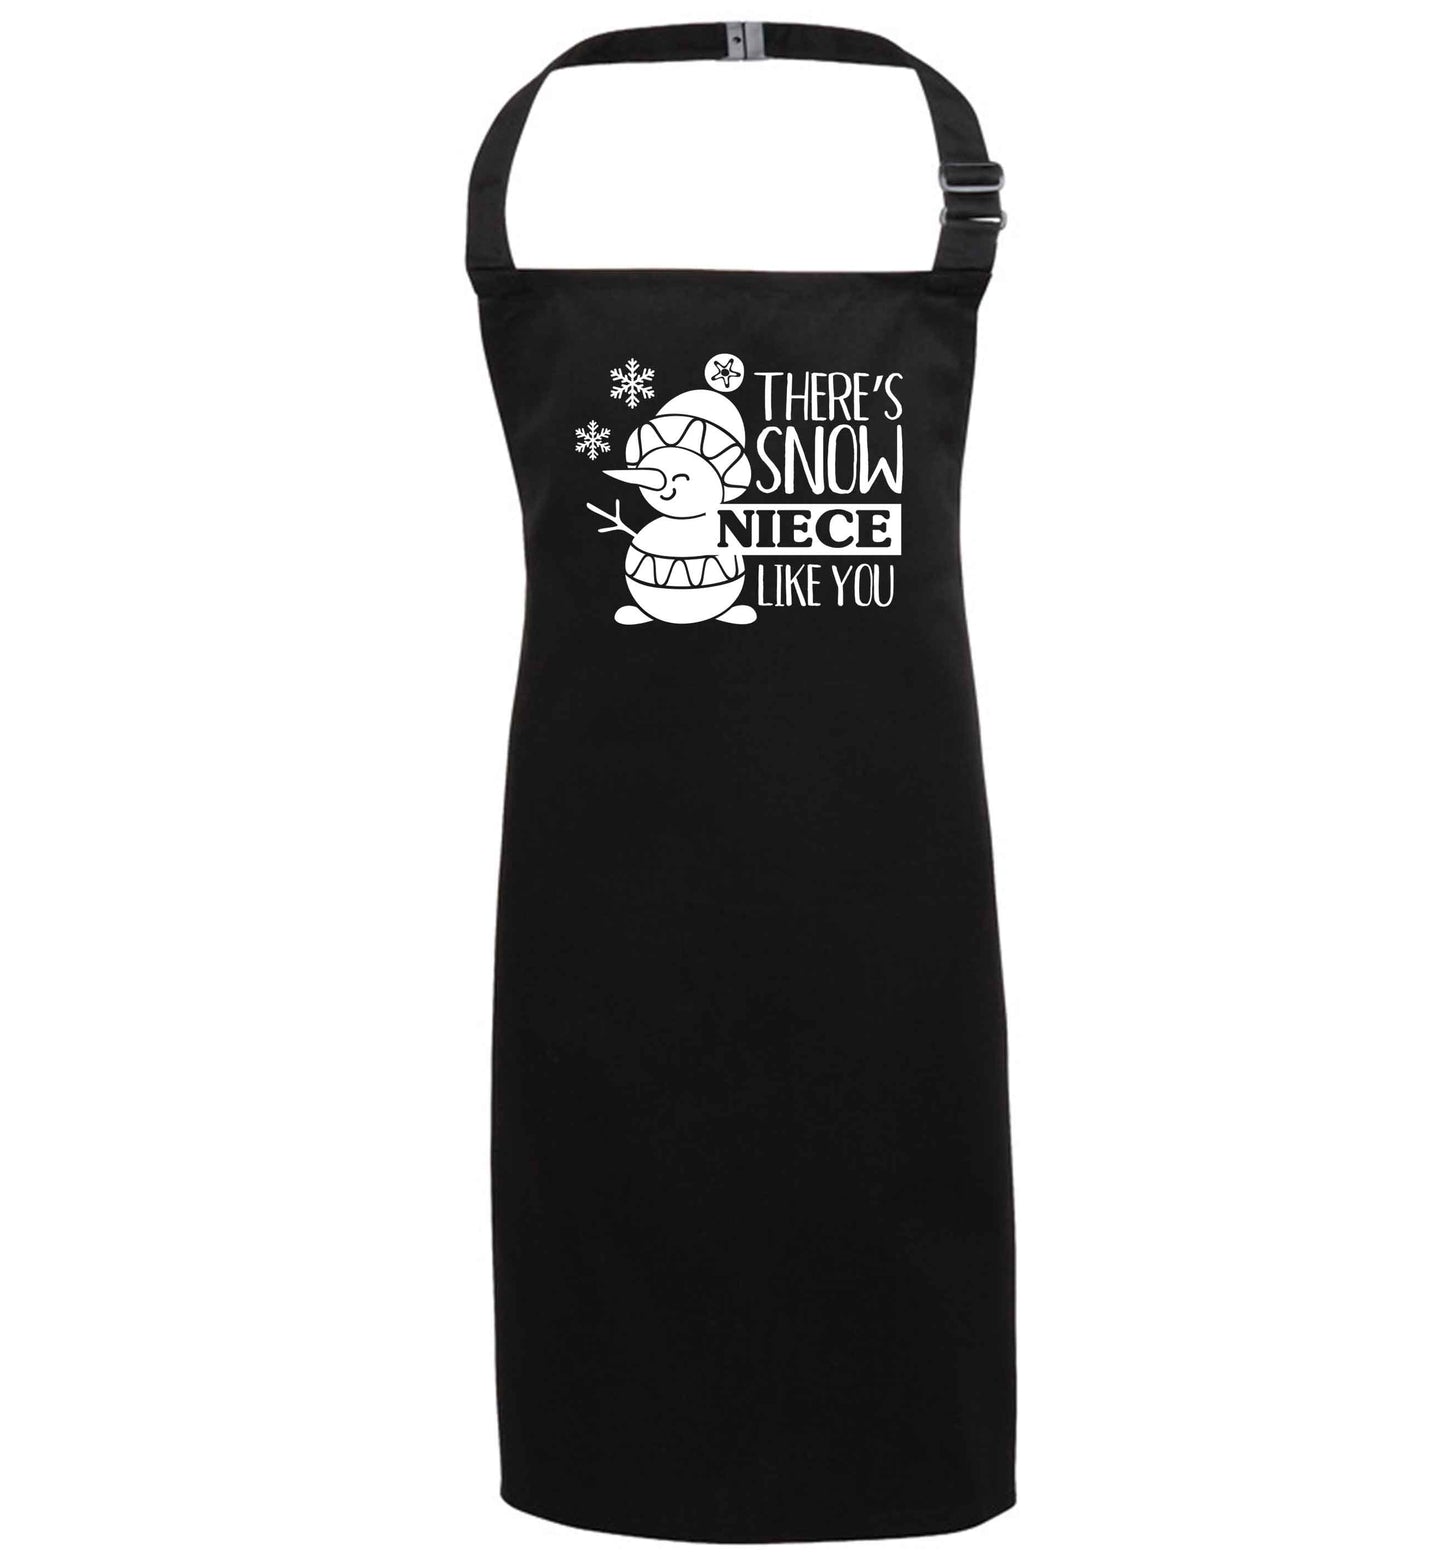 There's snow niece like you black apron 7-10 years